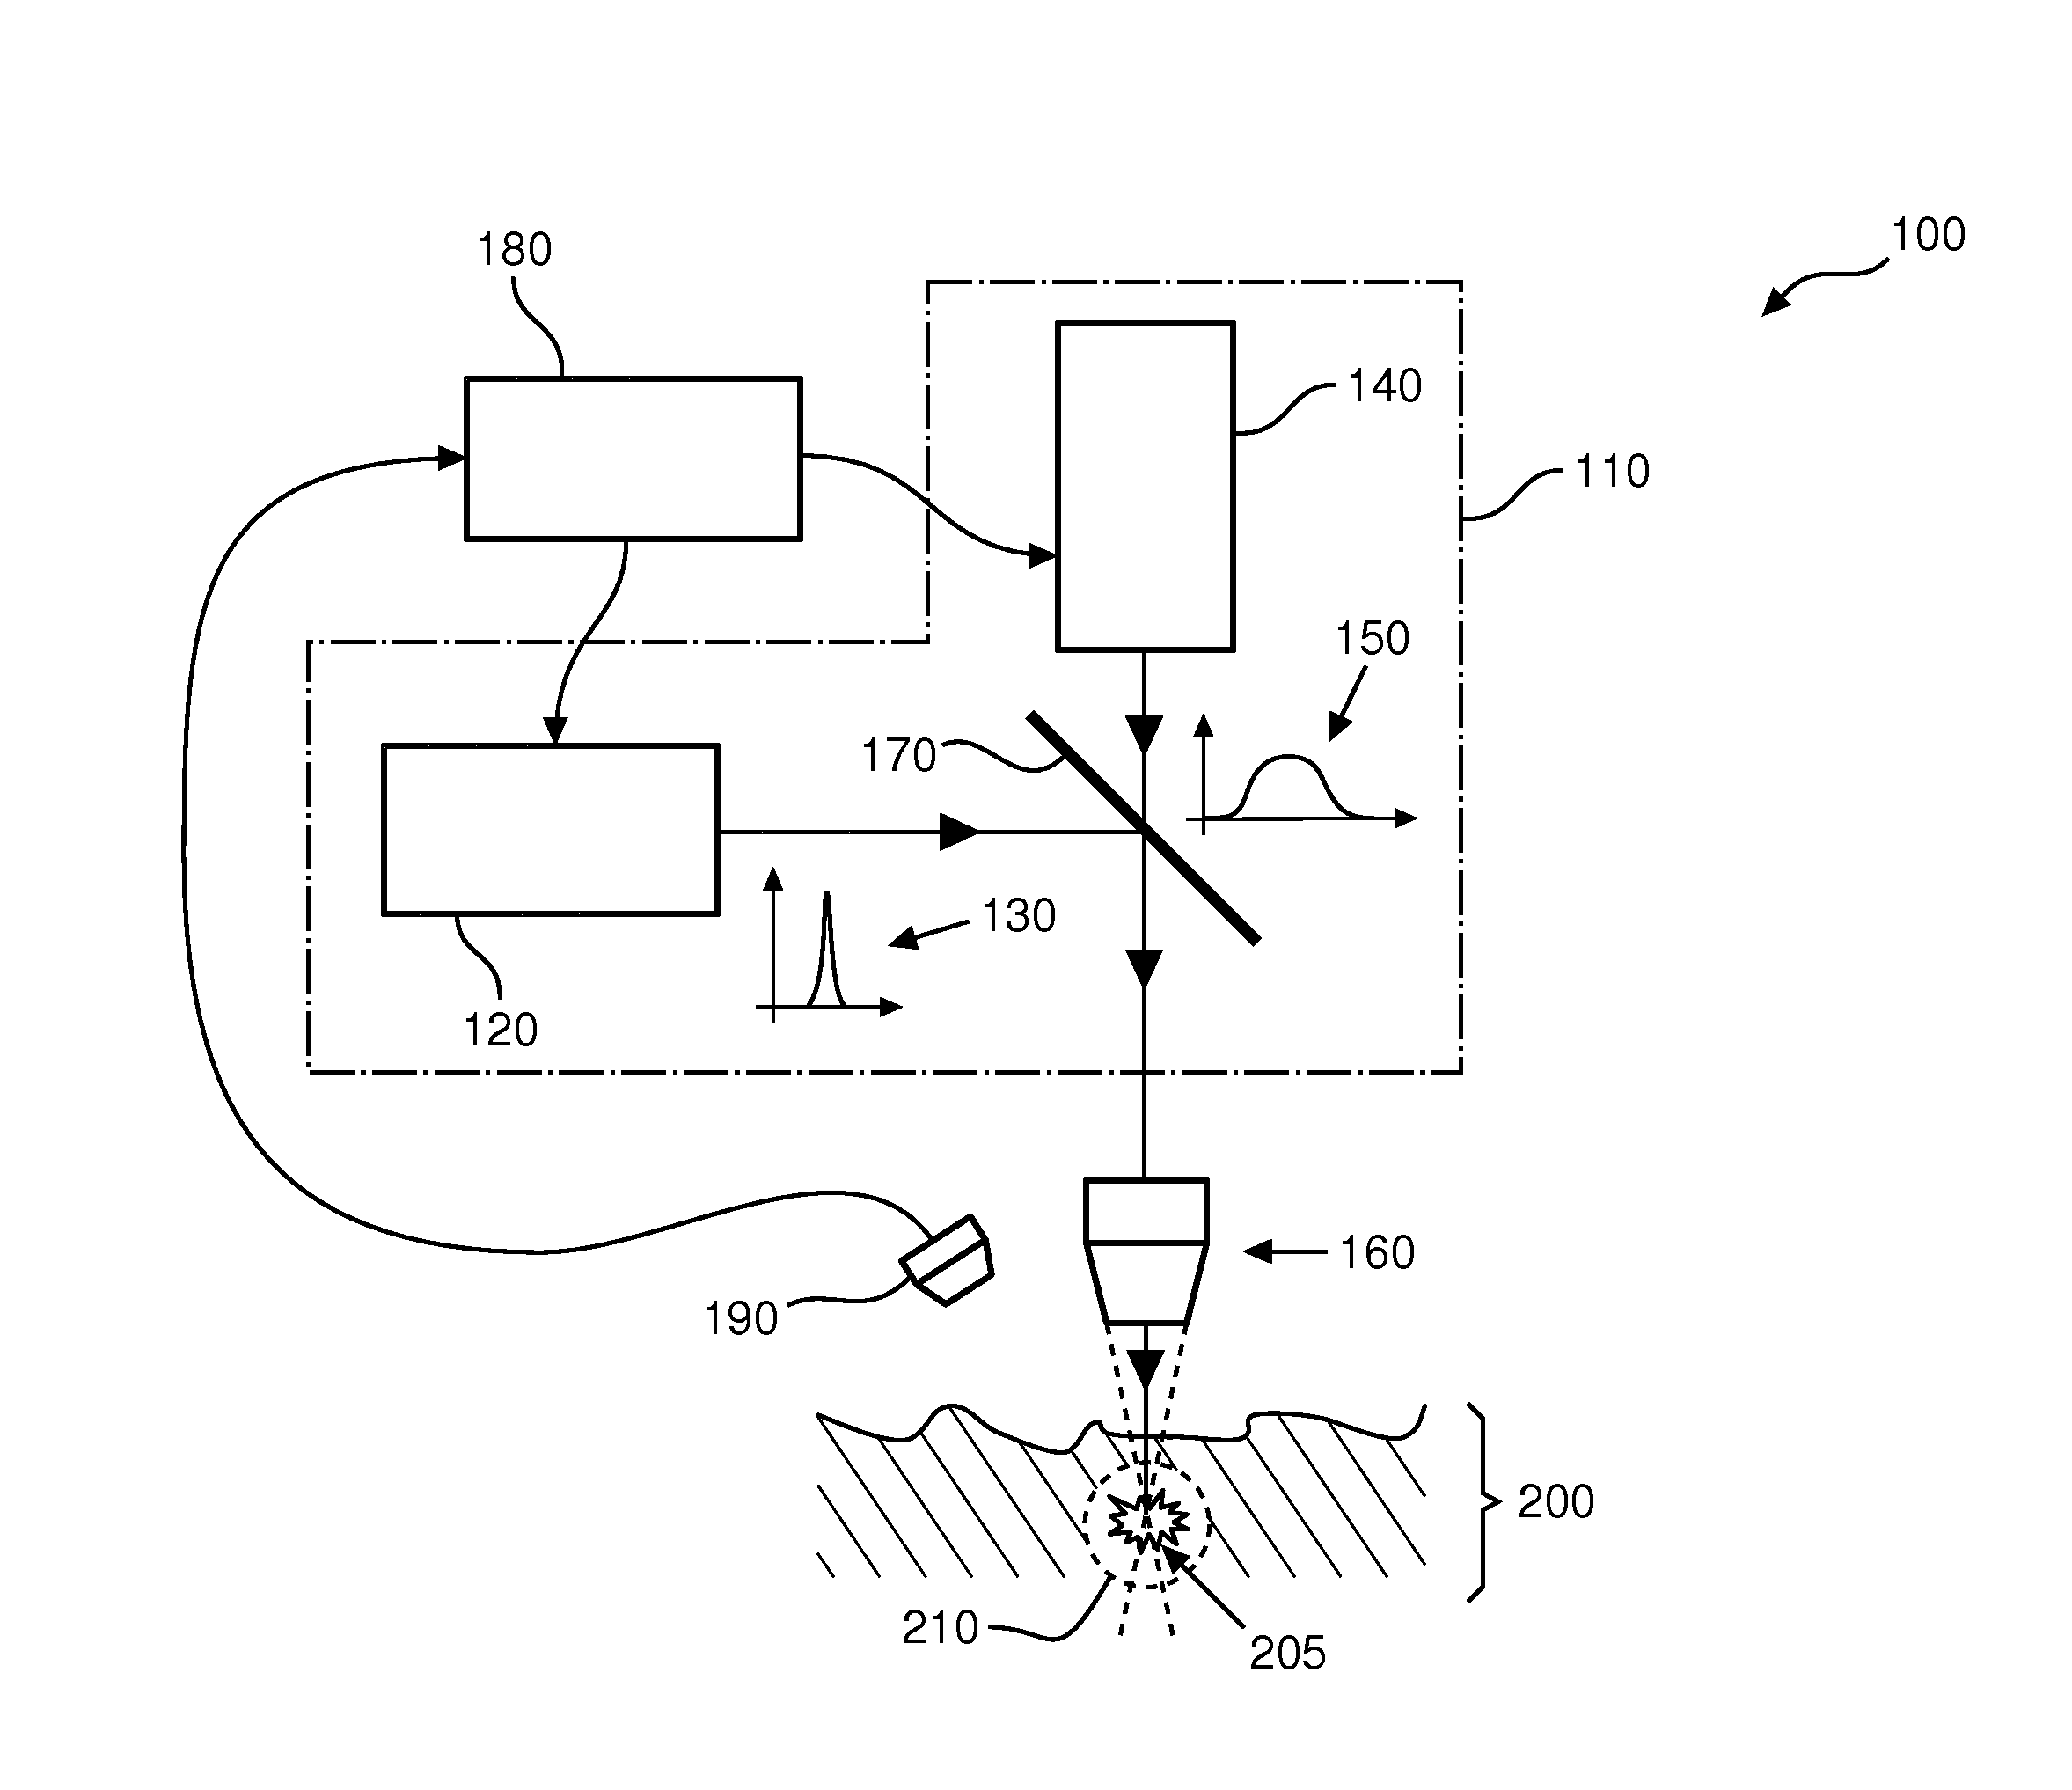 Non-invasive device for treatment of the skin using laser light